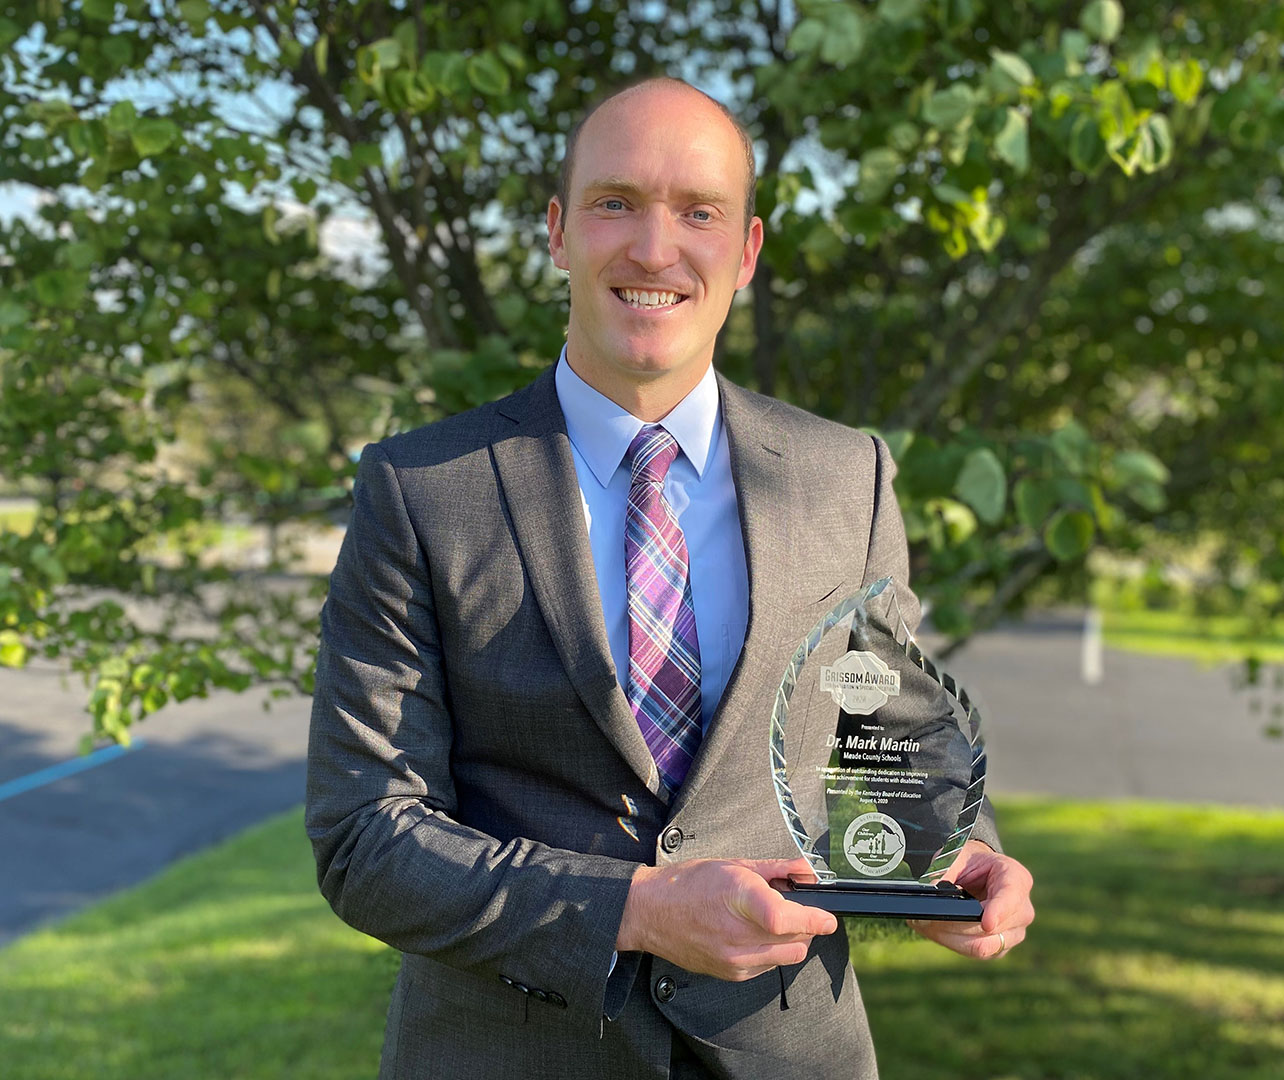 Mark Martin, the new superintendent of Meade County Schools, was presented with the 2020 Grissom Award for Innovation in Special Education at the Kentucky Board of Education’s Aug. 6 meeting.